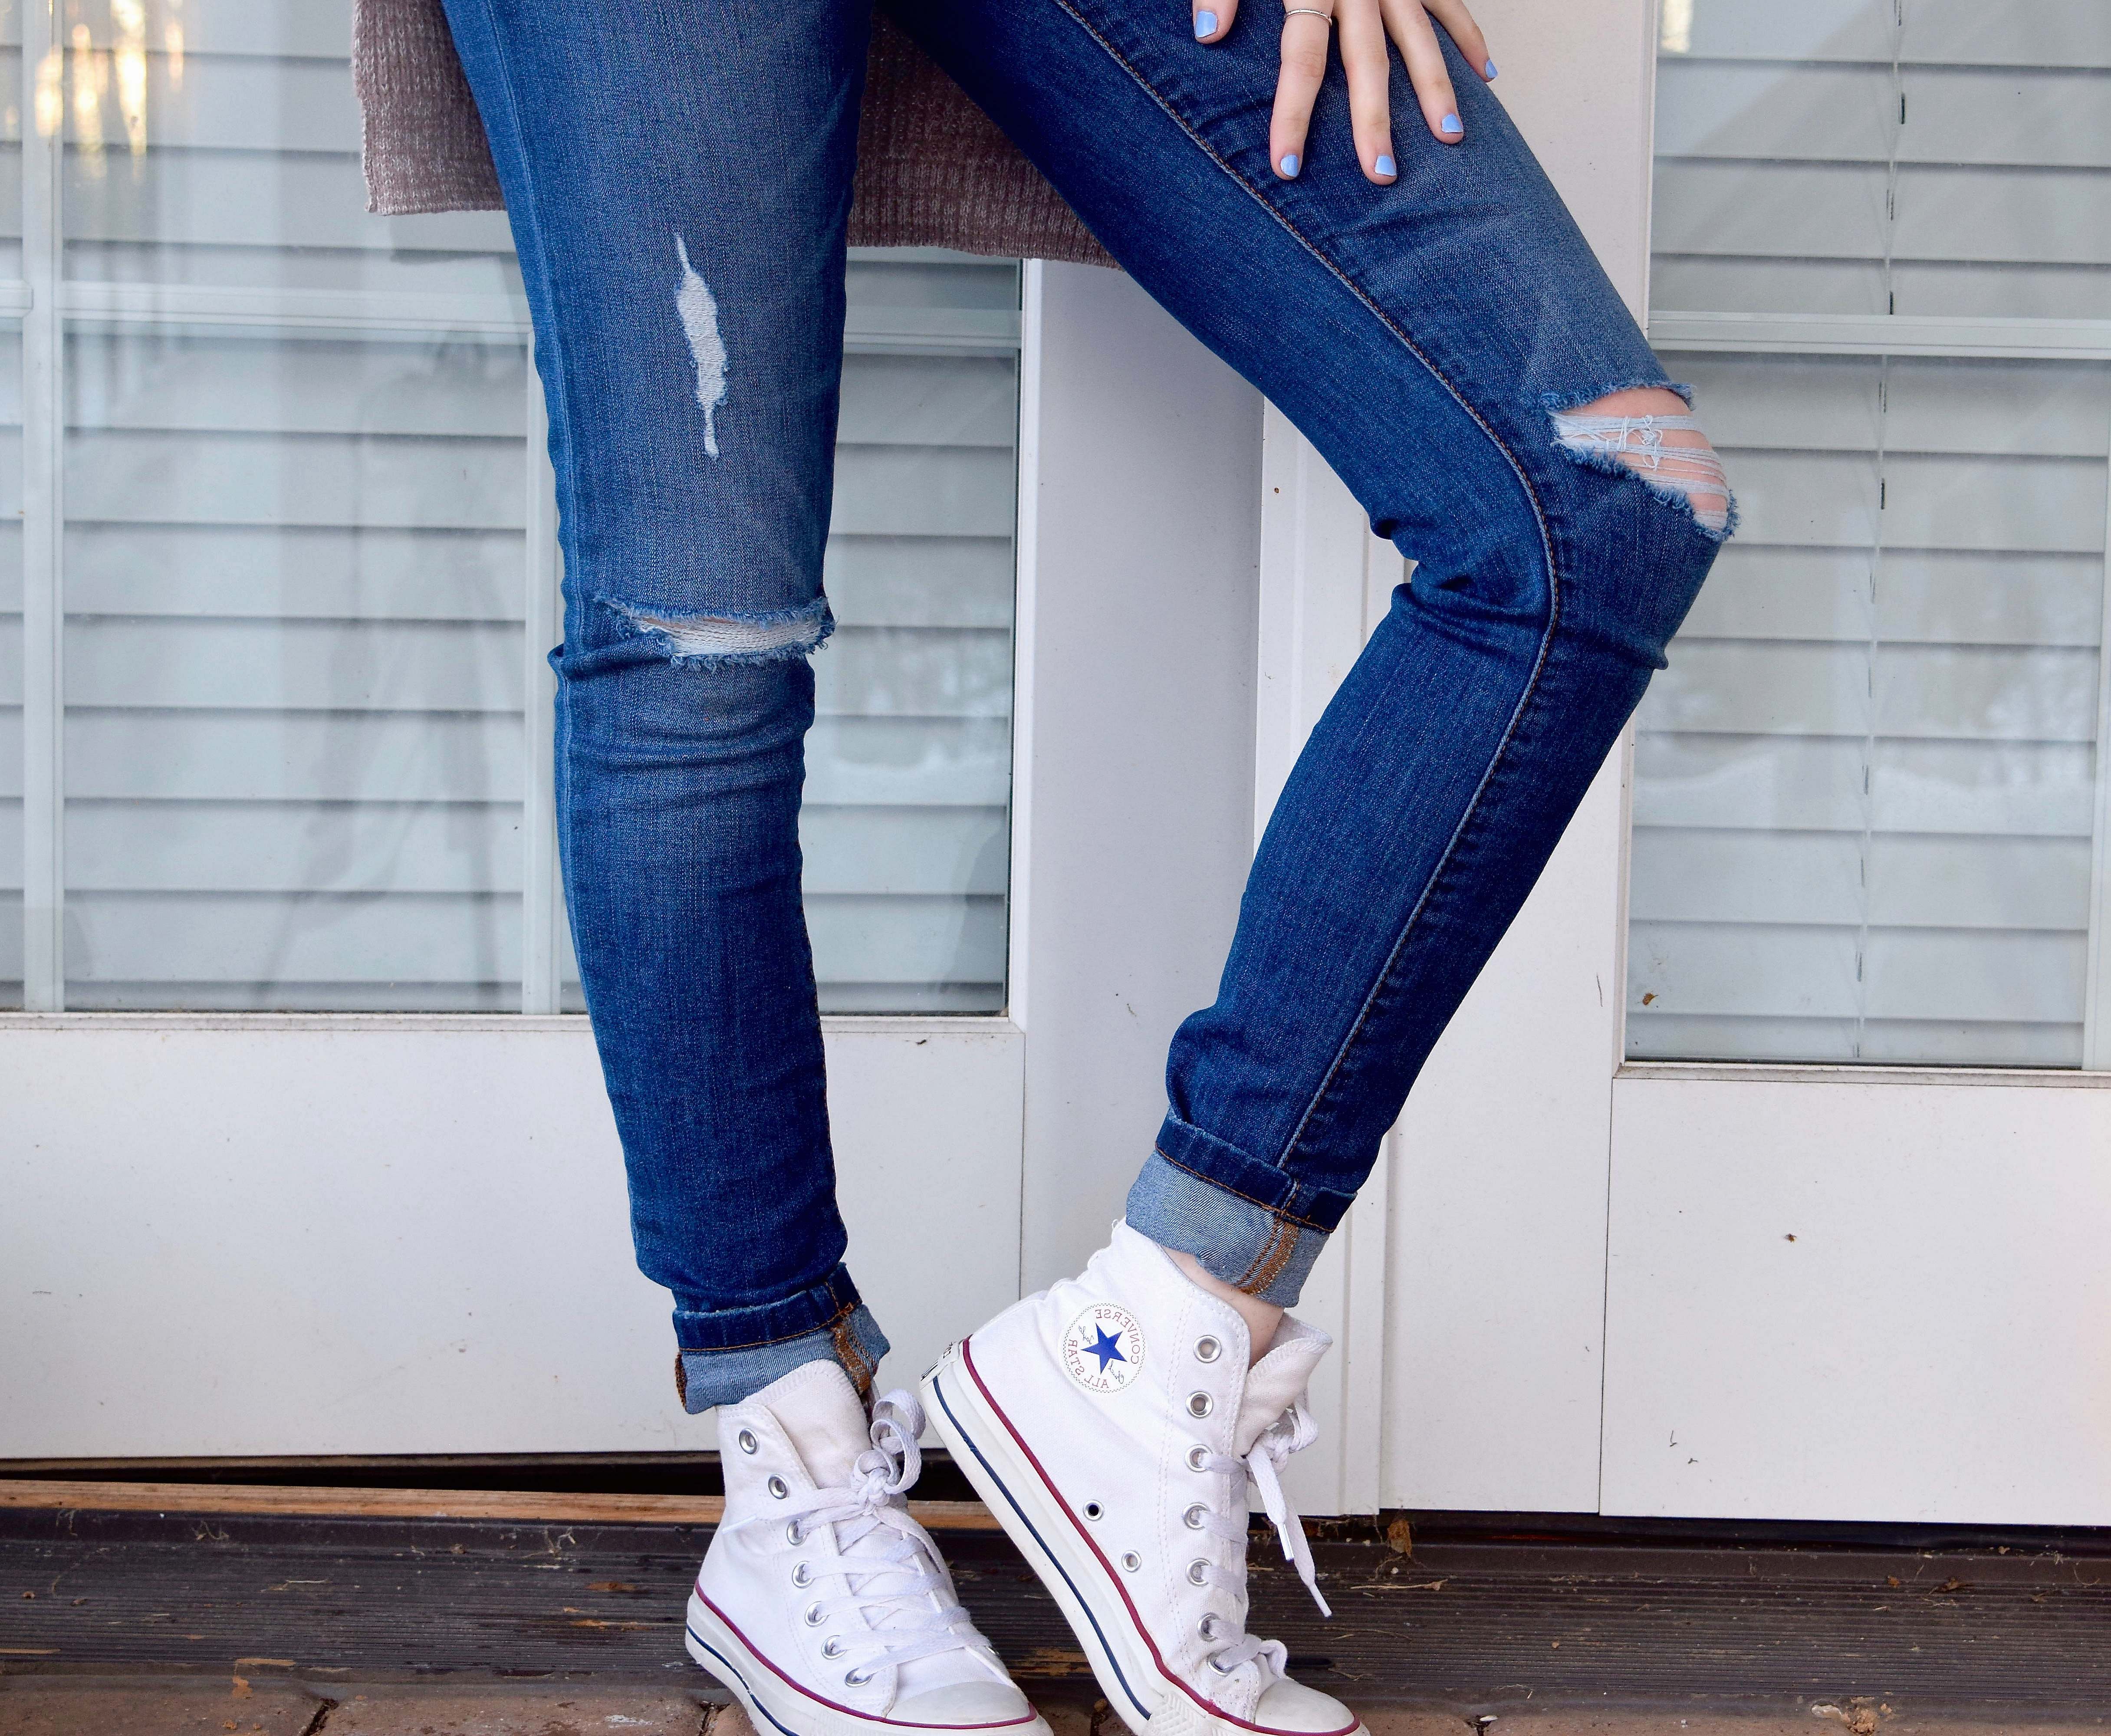 Shoe Women's Distressed Blue Denim Jeans And Pair Of White Converse ...